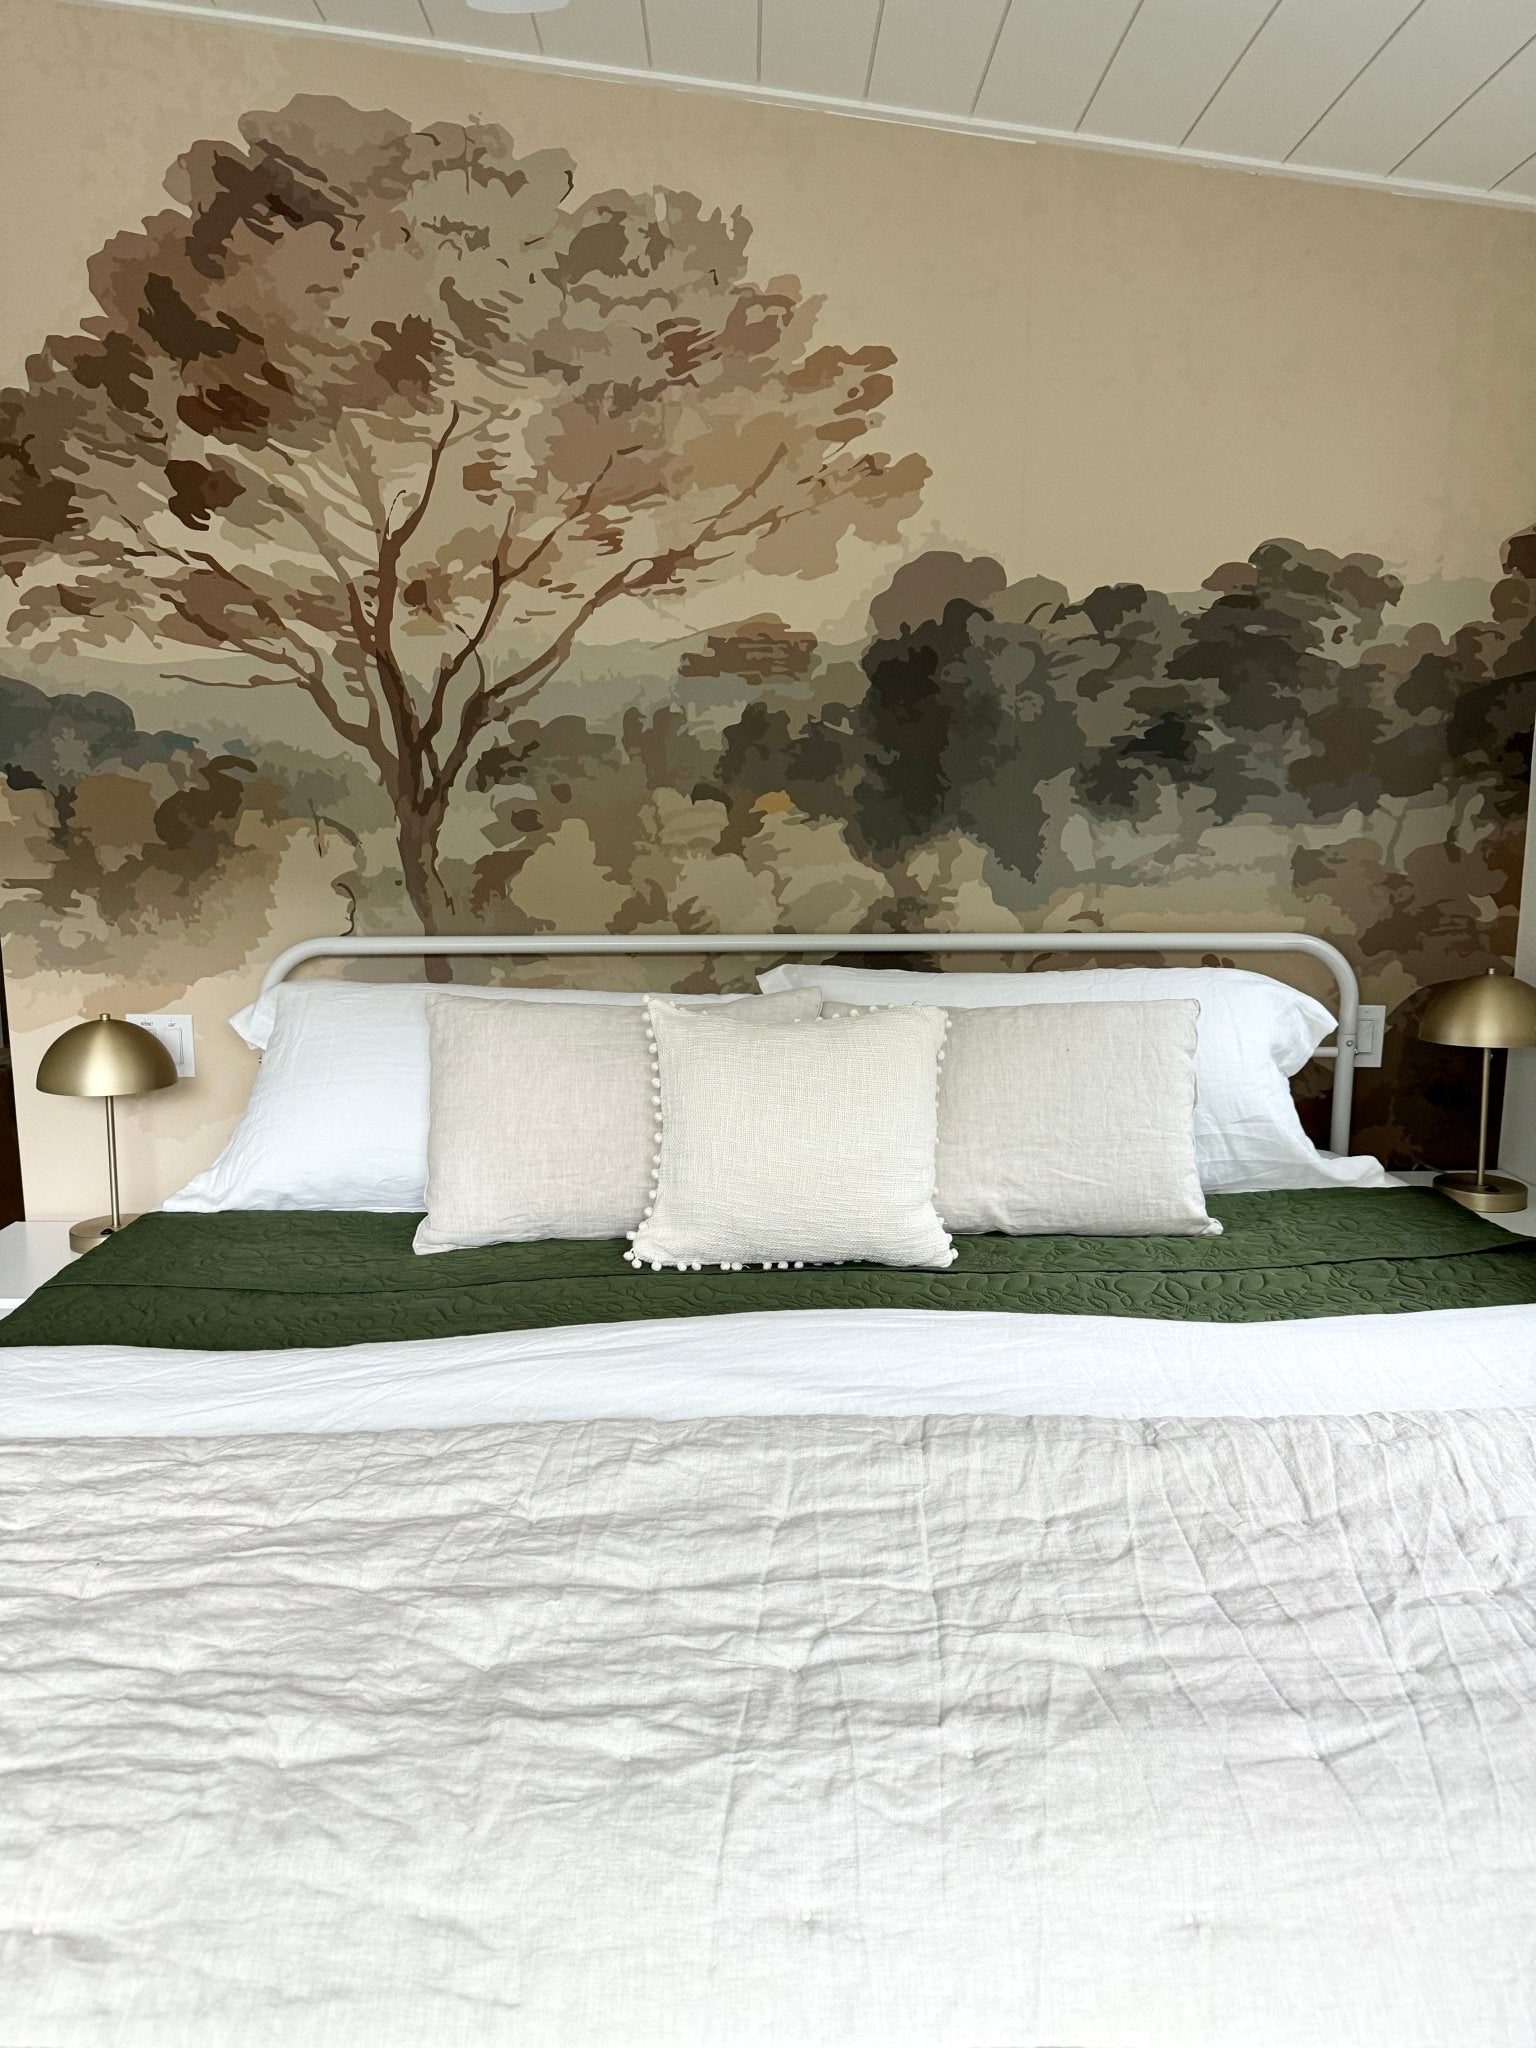 A serene bedroom featuring a Vintage Landscape mural with a tree dominating the scene, flanked by gold lamps and crisp white bedding with a green accent.